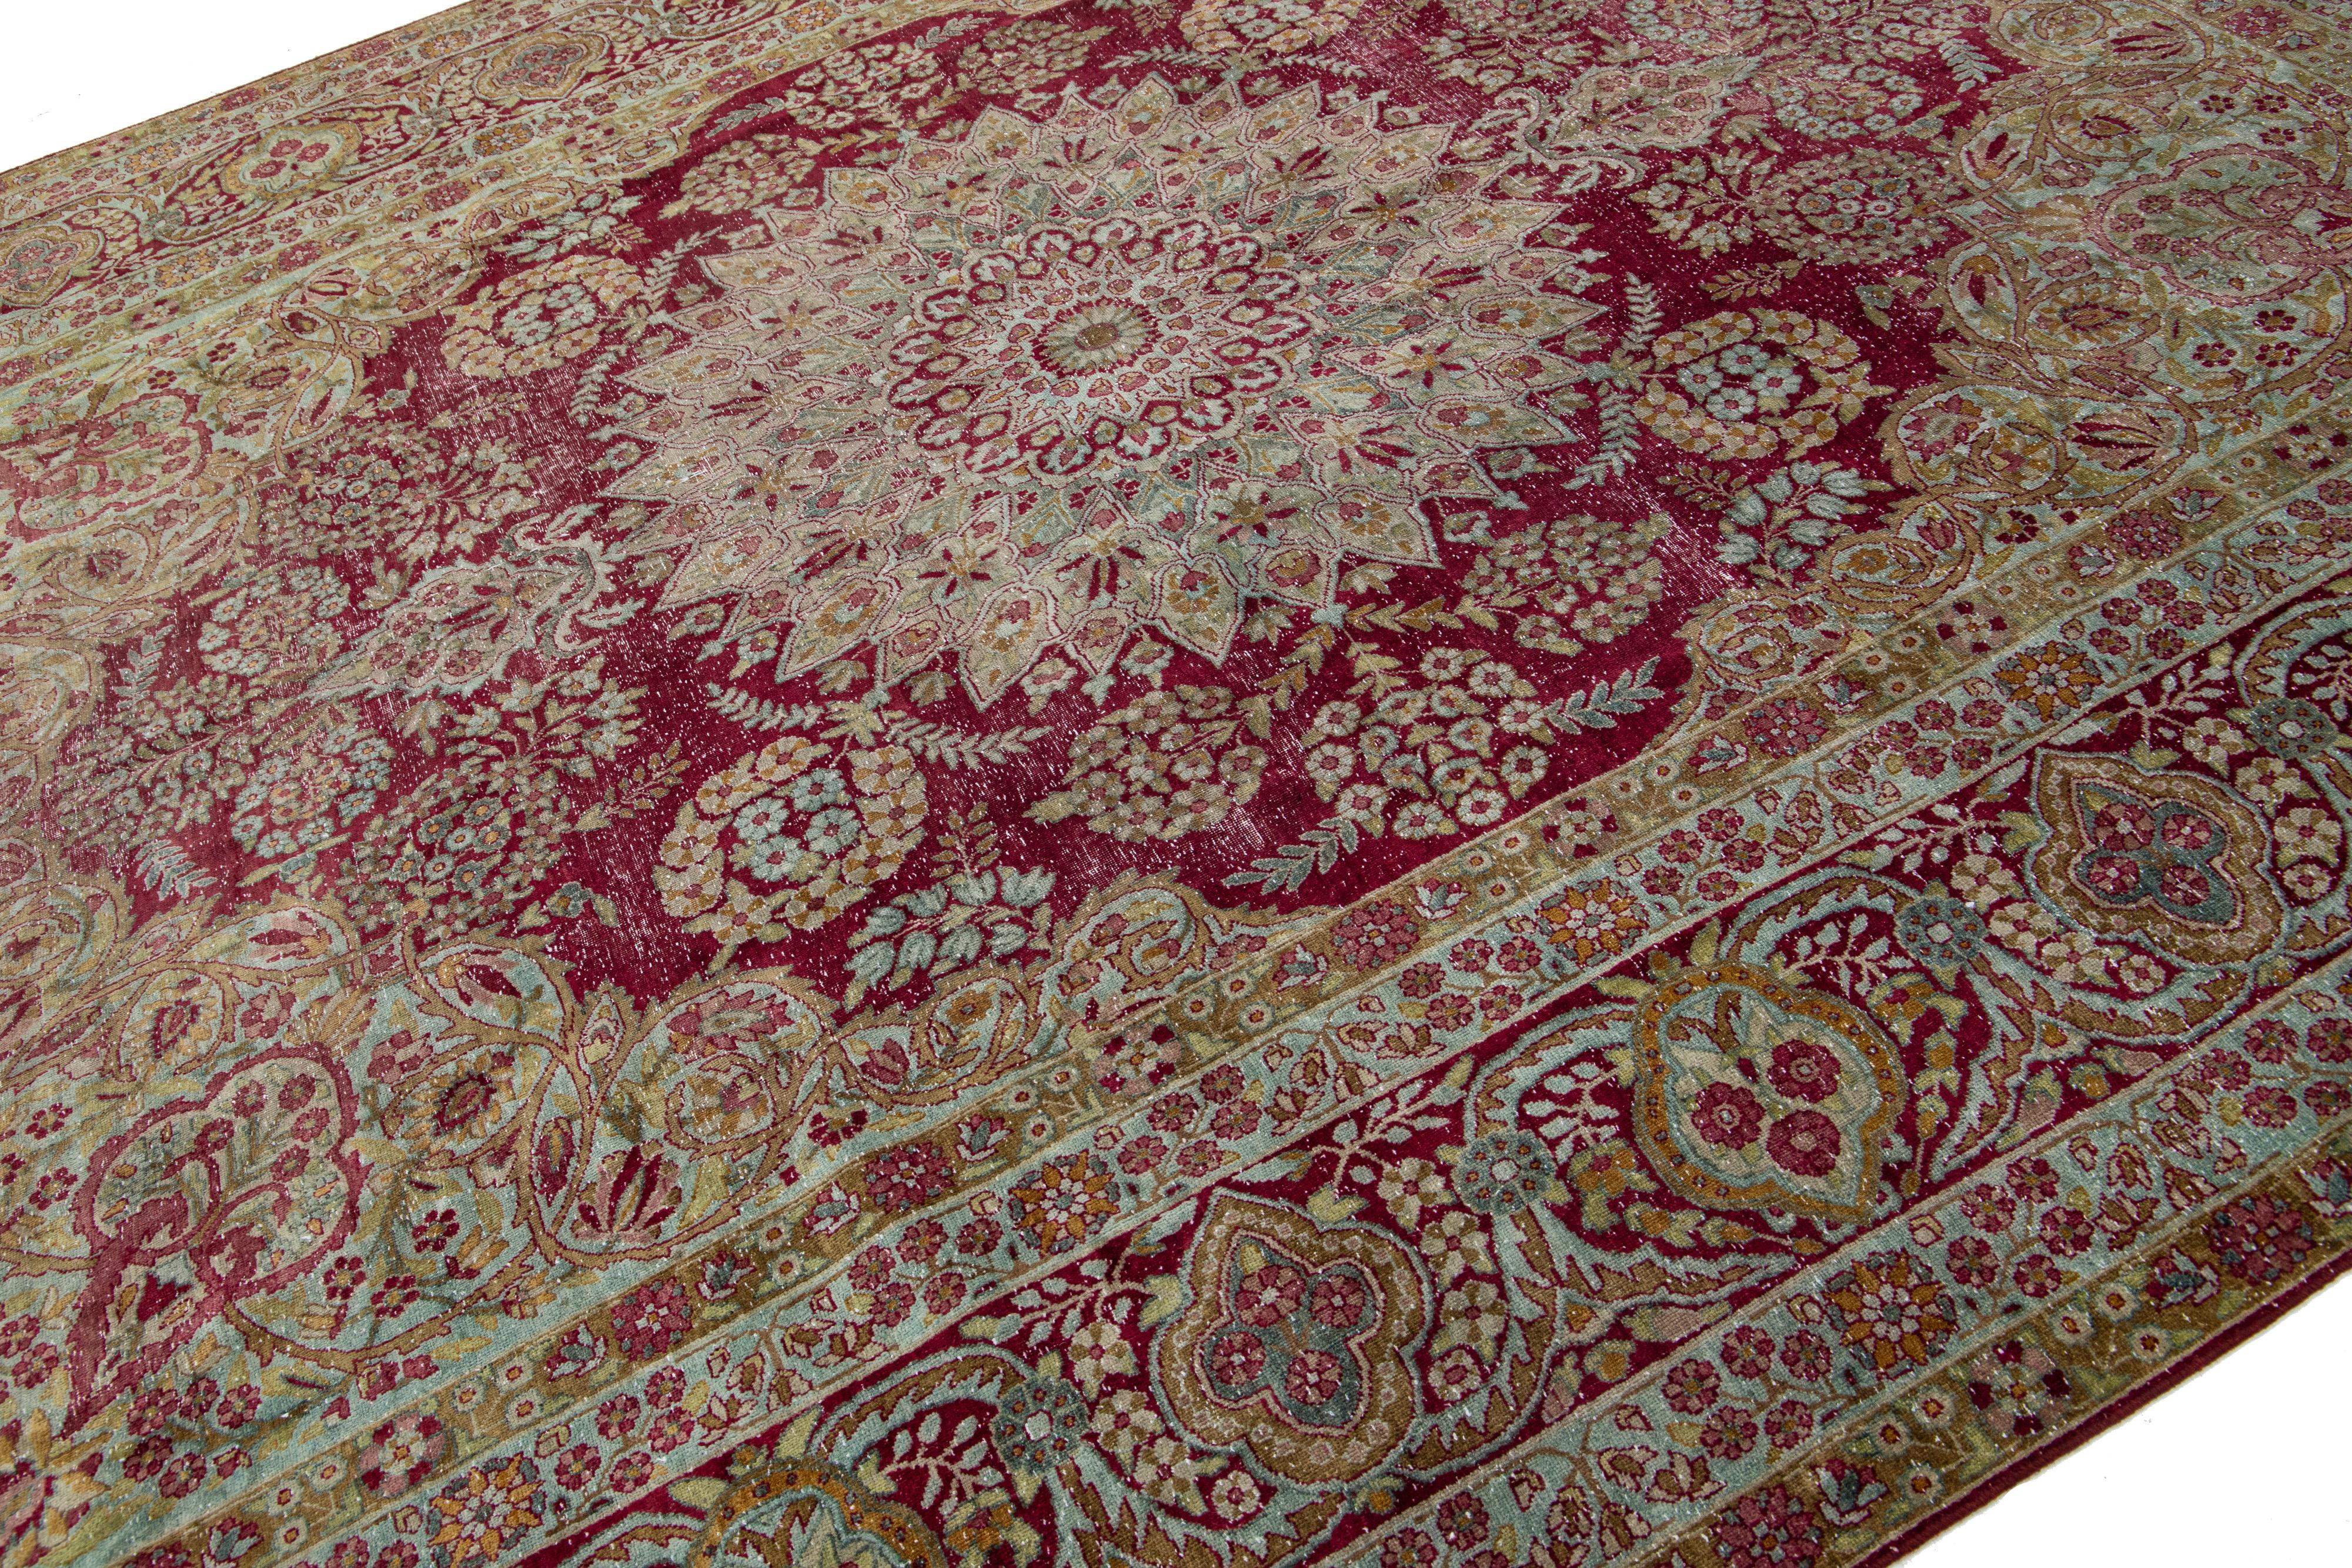 Antique Wool Rug Persian Kerman featuring a Medallion Floral Motif  For Sale 3